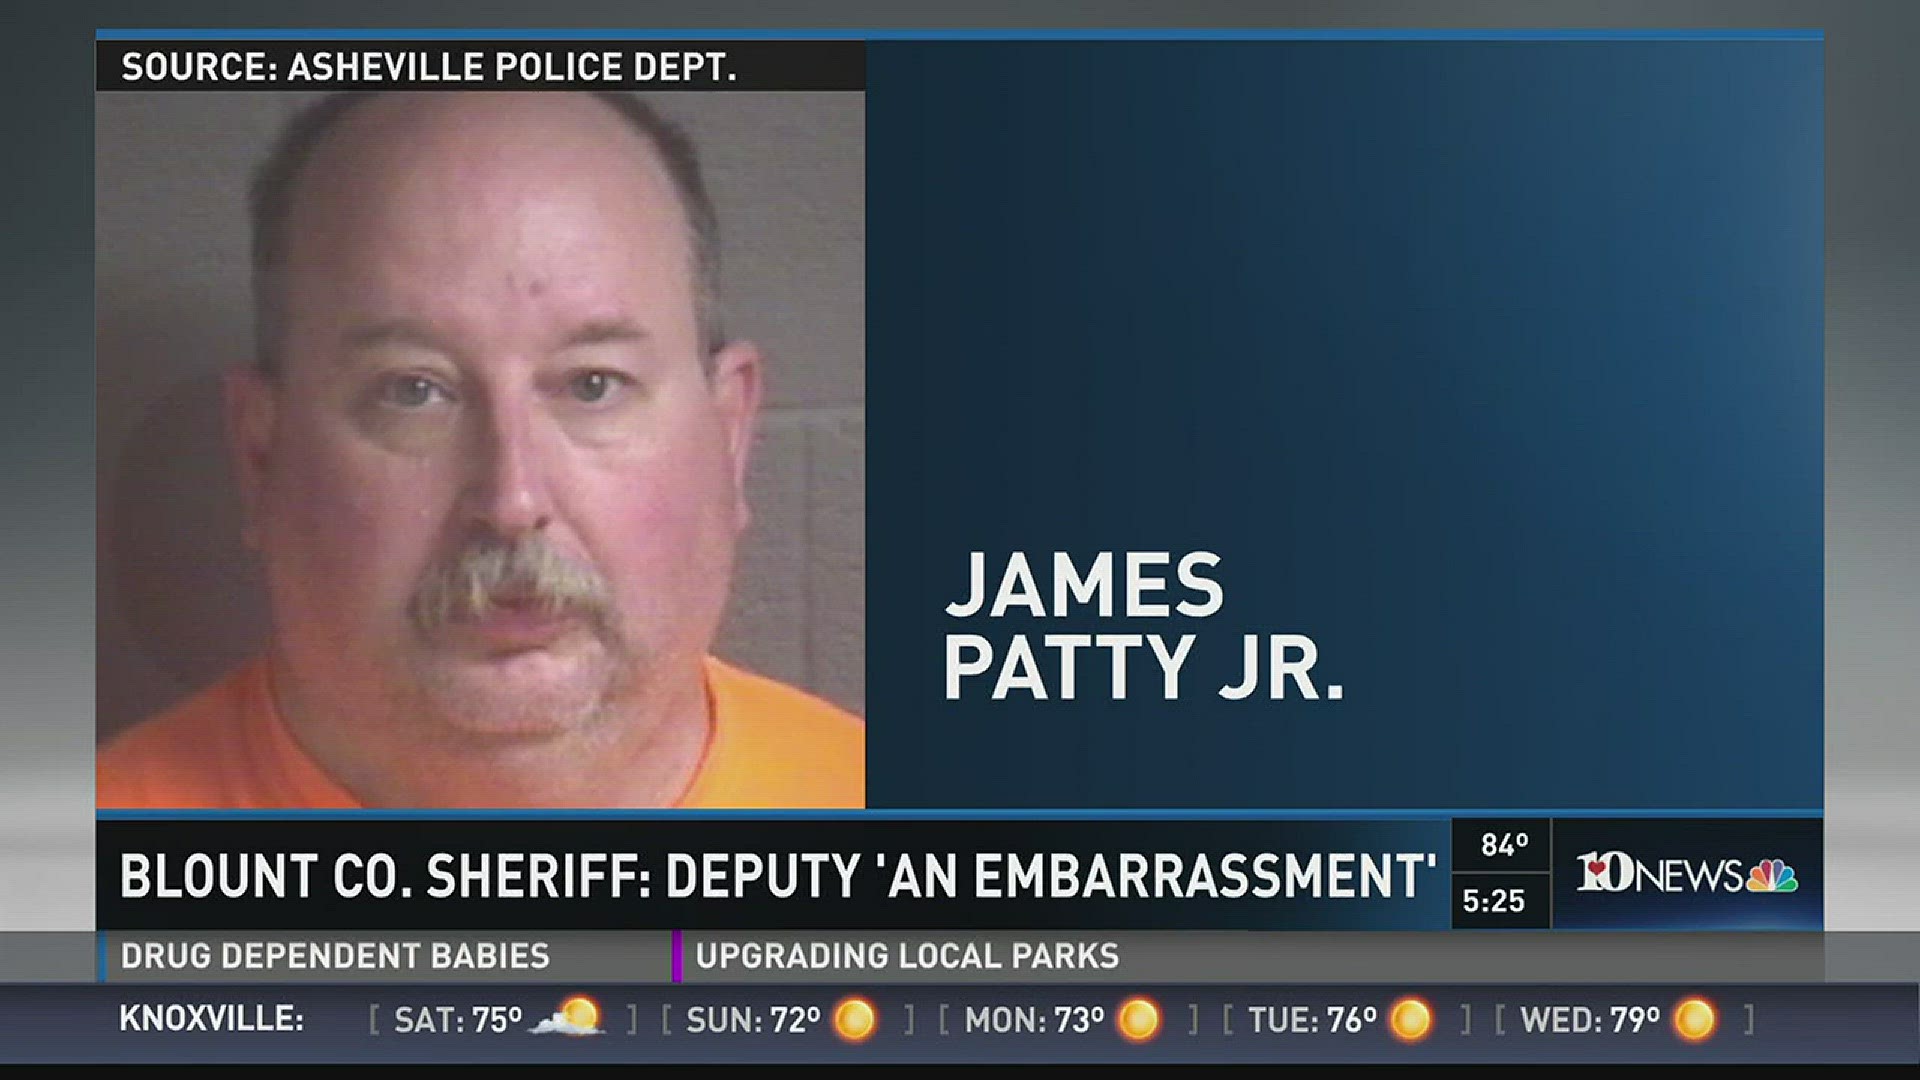 James Patty Jr was arrested in Asheville after investigators say he arranged to meet an underage girl for sex.